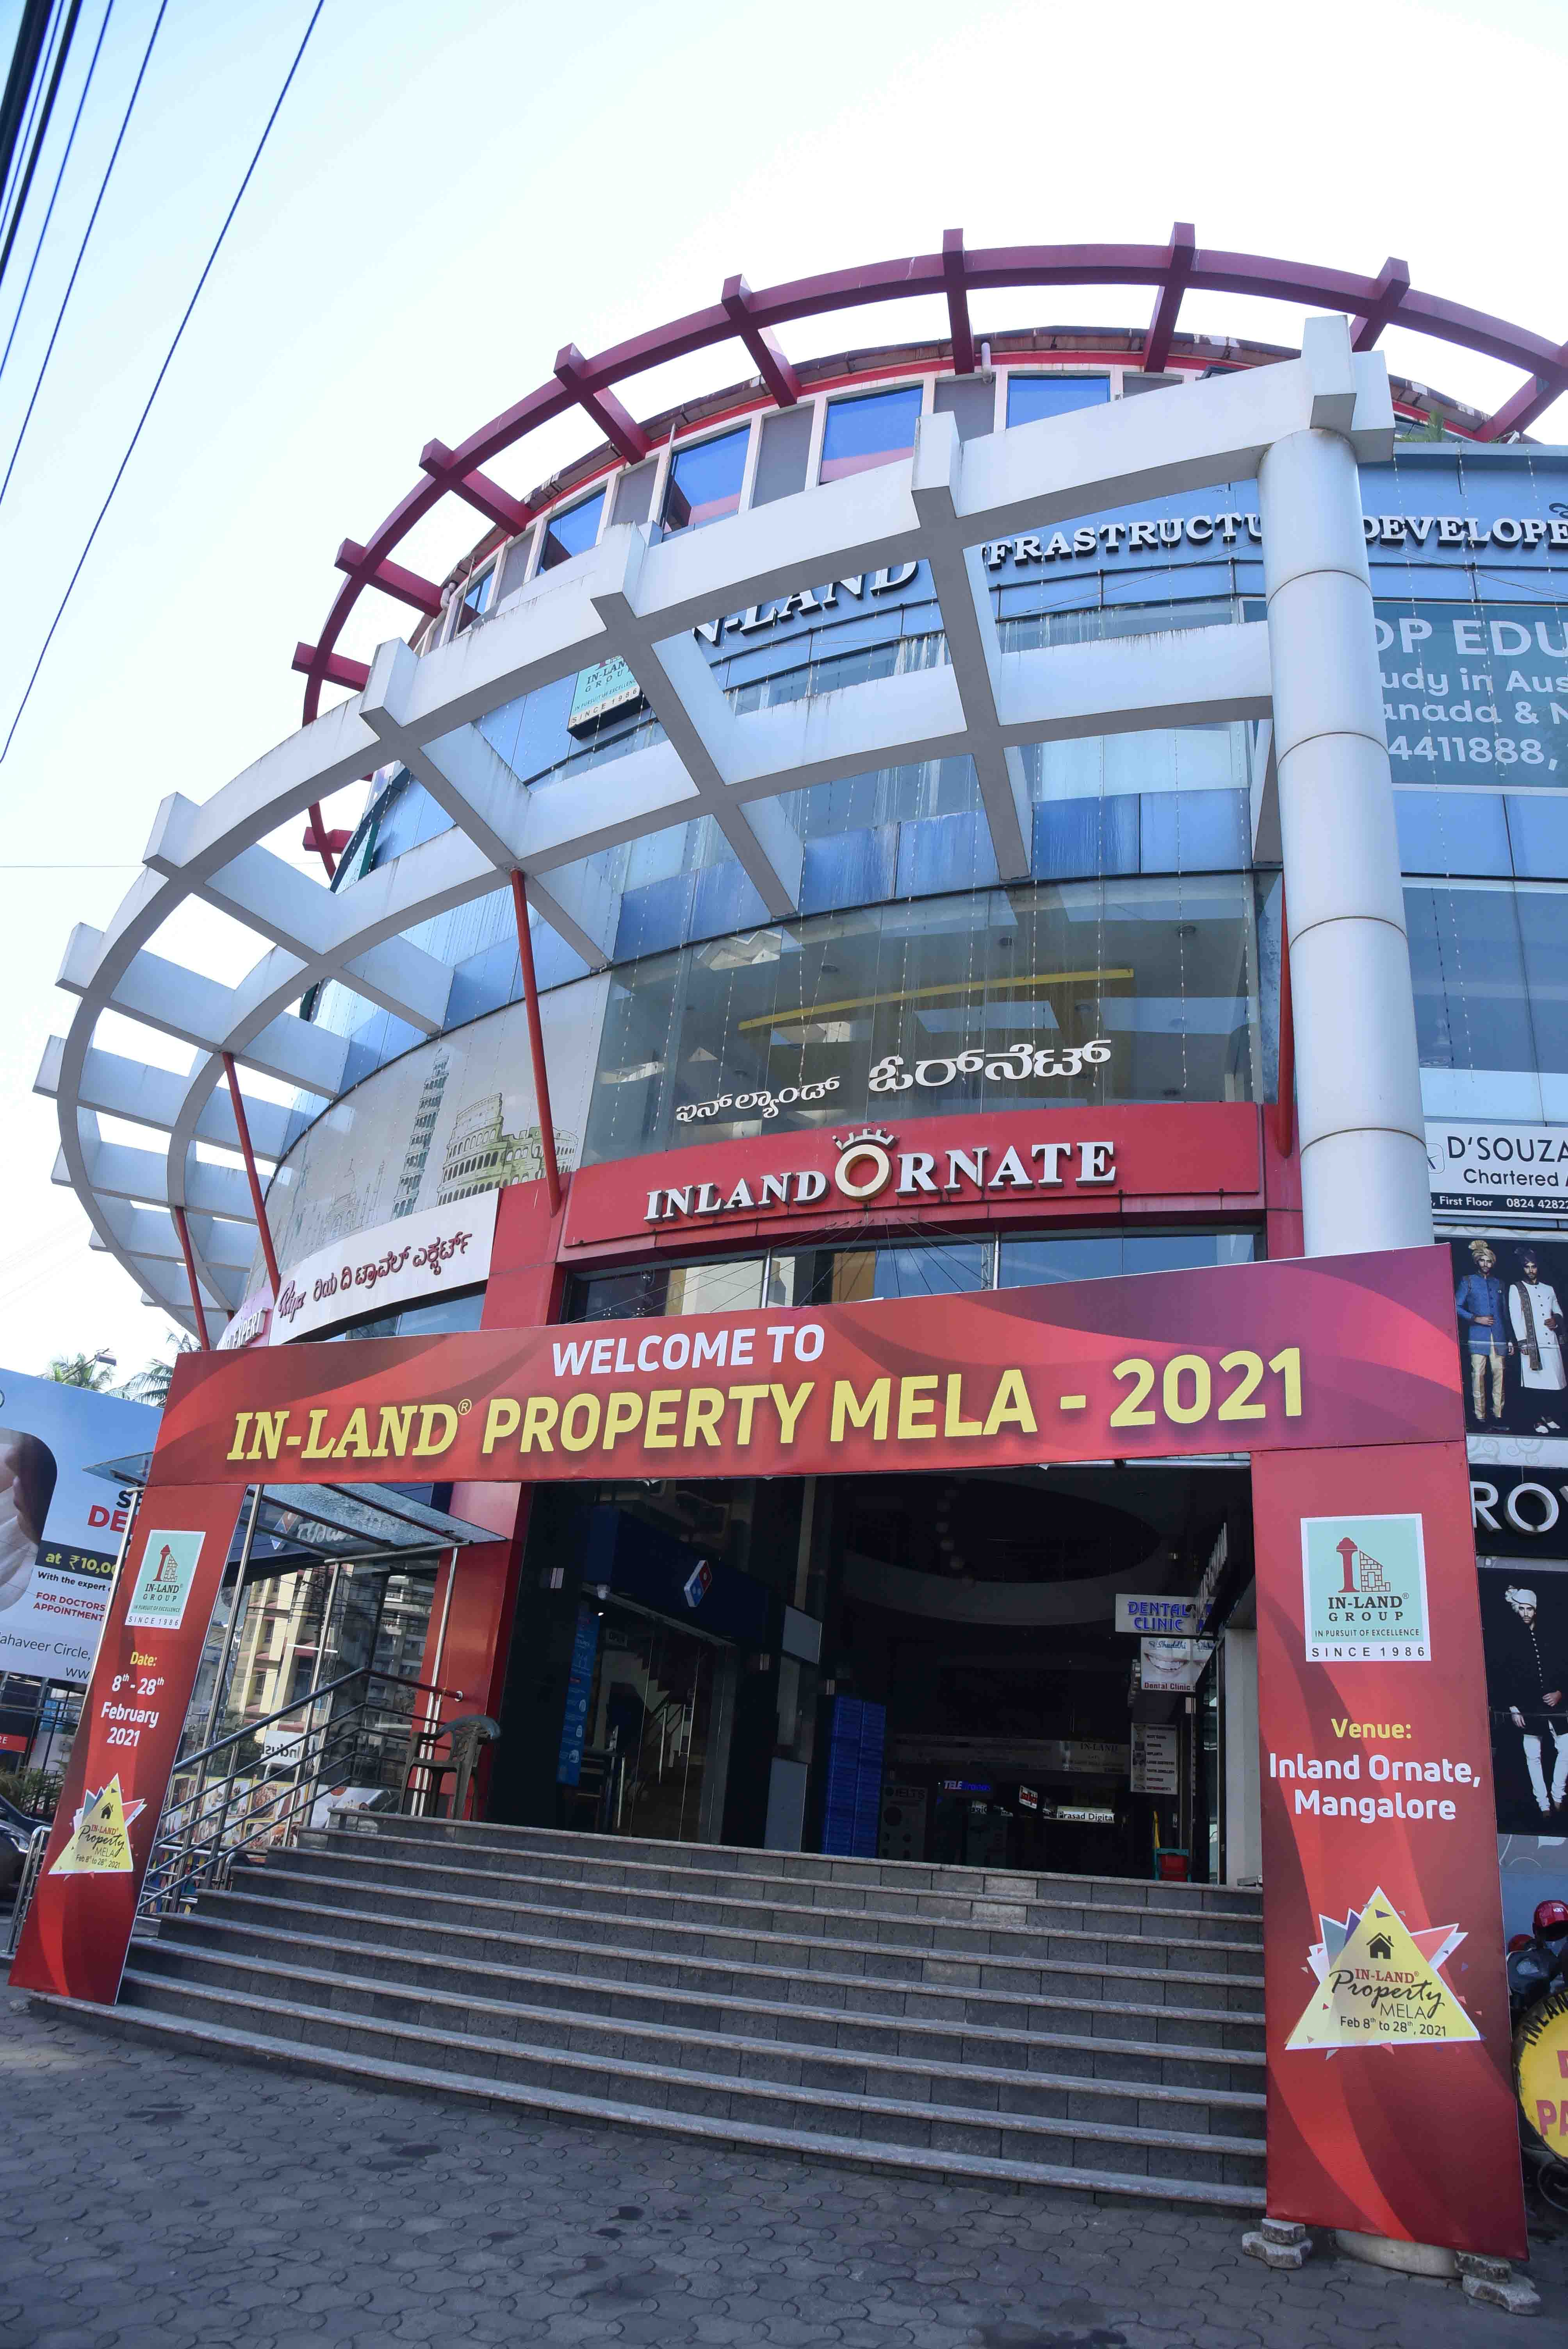 IN-LAND receives tremendous response to its Property Mela 2021